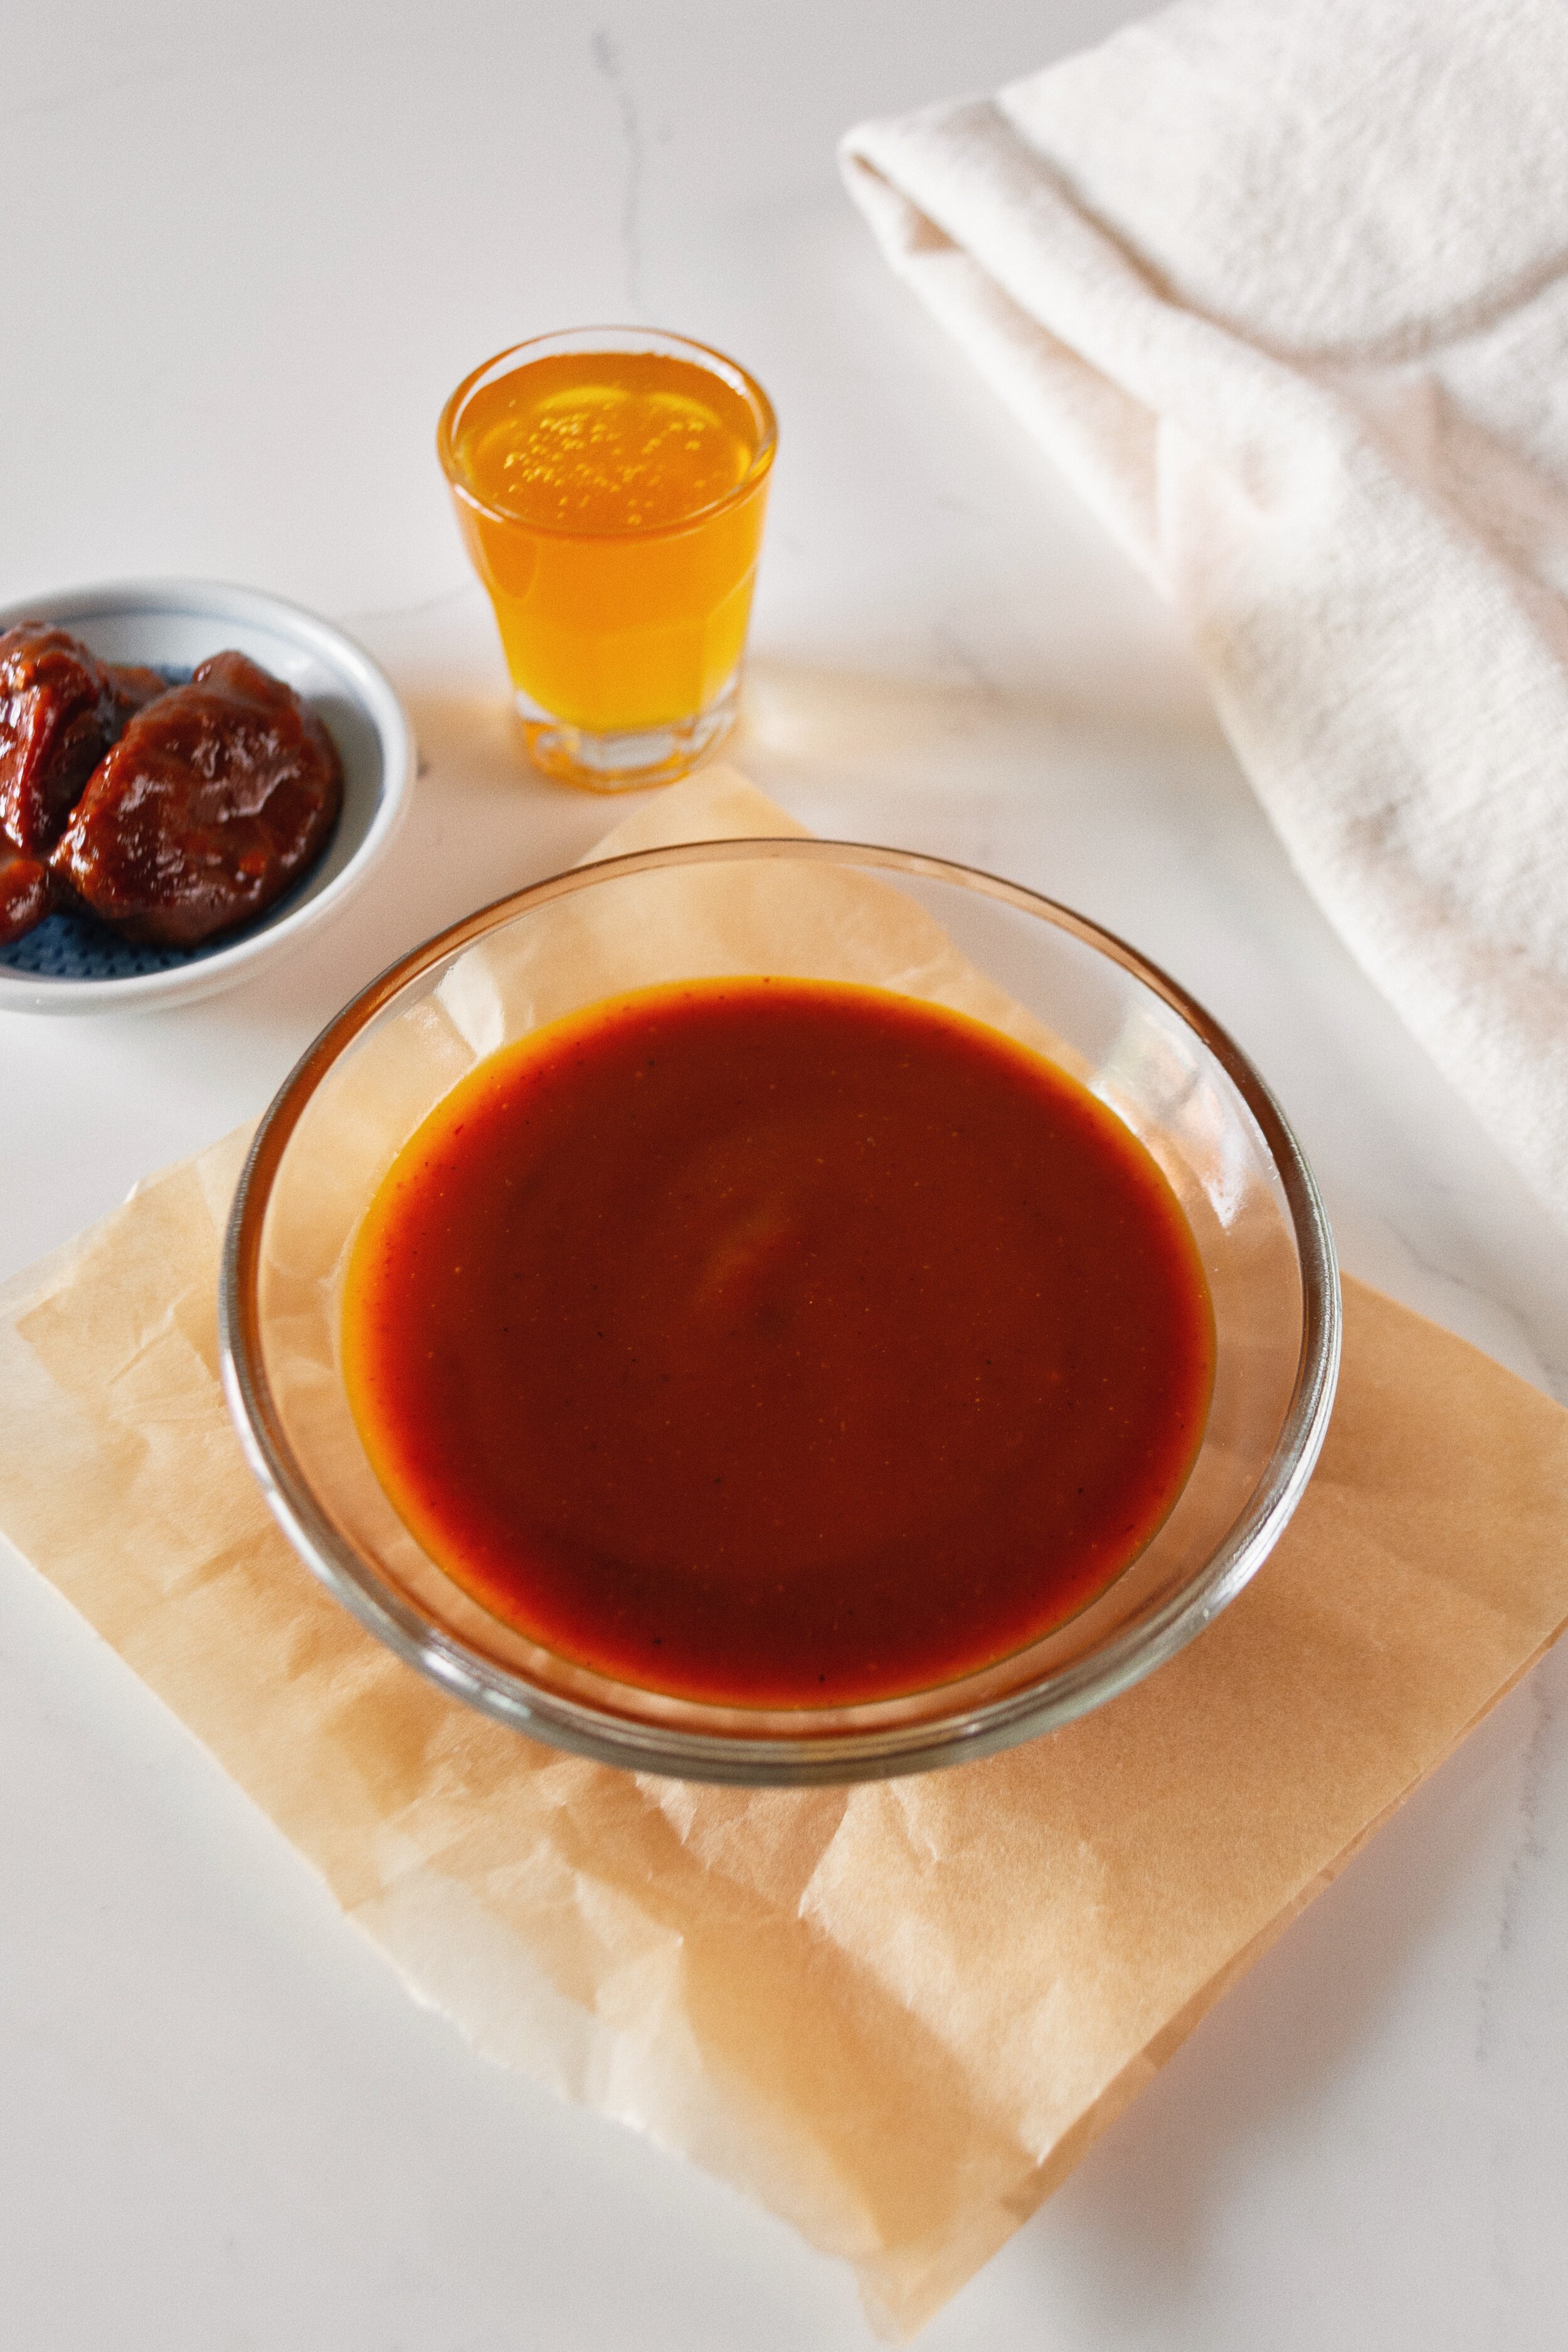 All ingredients for Sweet and Spicy Honey Chipotle Sauce